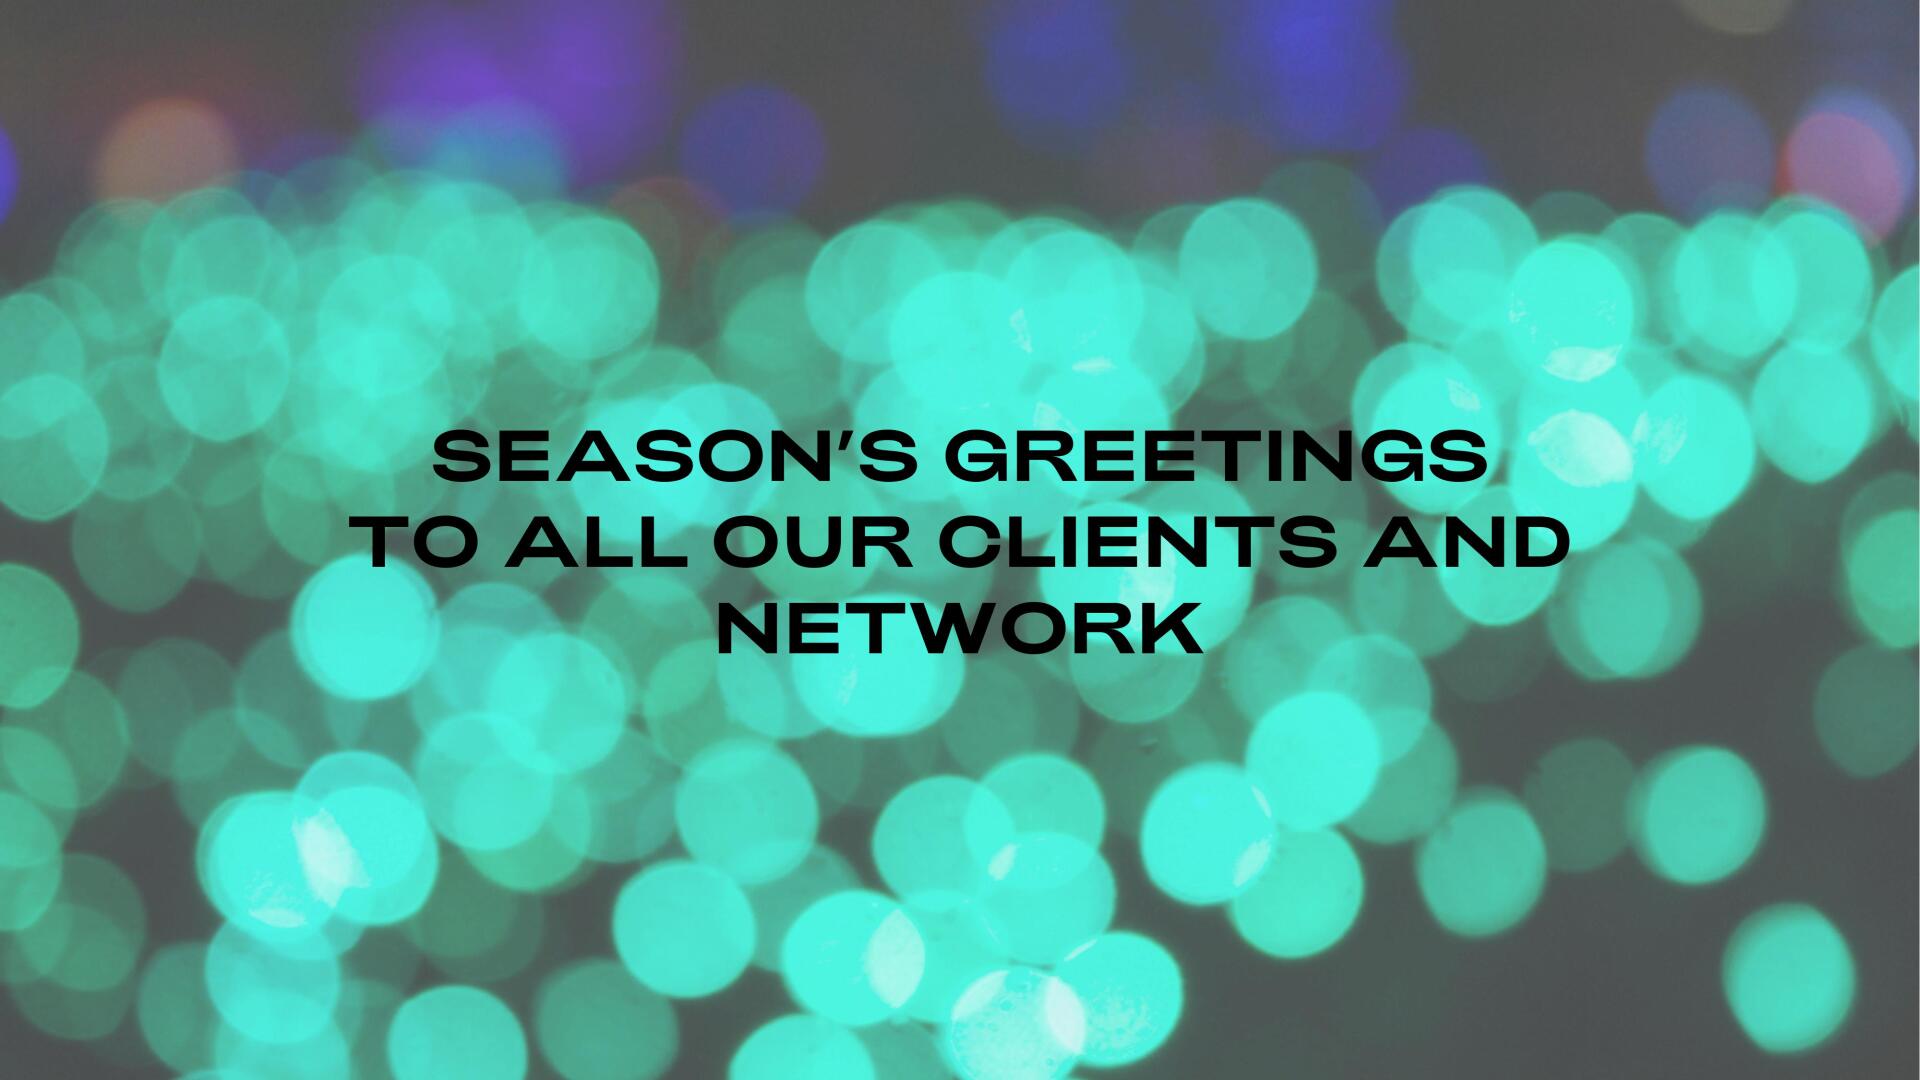 A background of blurred blue green lights with the words Seasons greetings printed in black